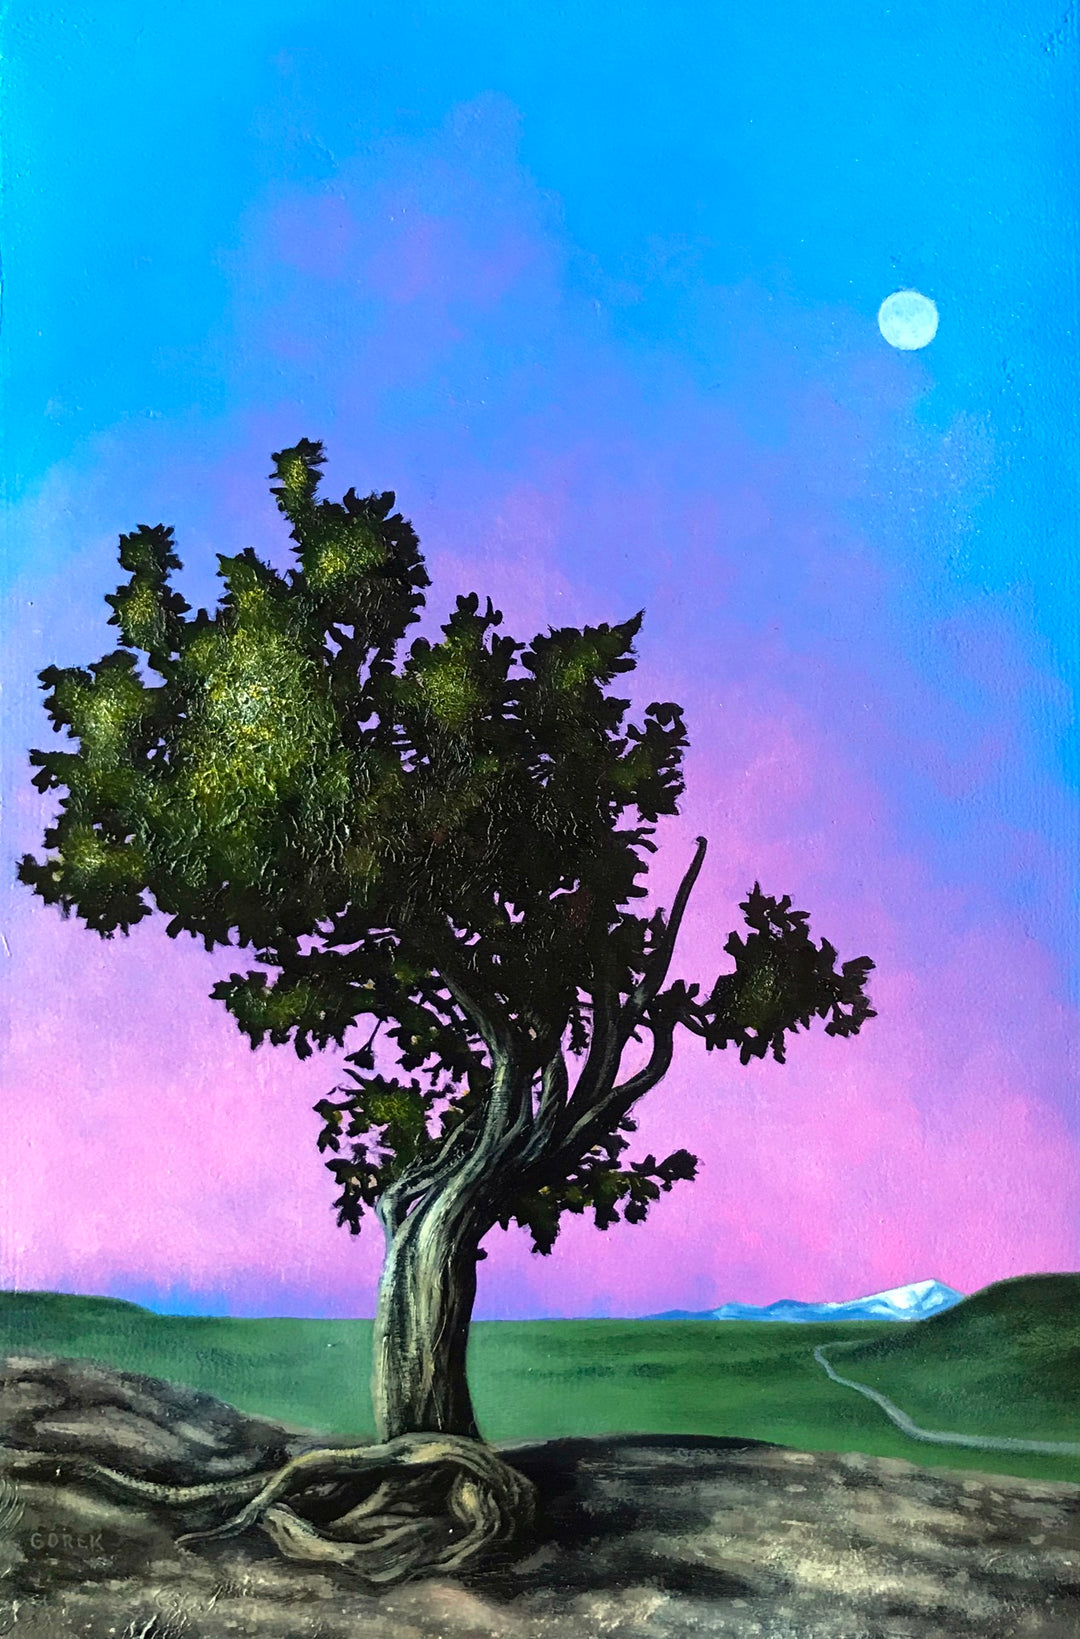 Thane Gorek's "Sentinel" oil on canvas captures a sentinel tree standing alone in the middle of a field.